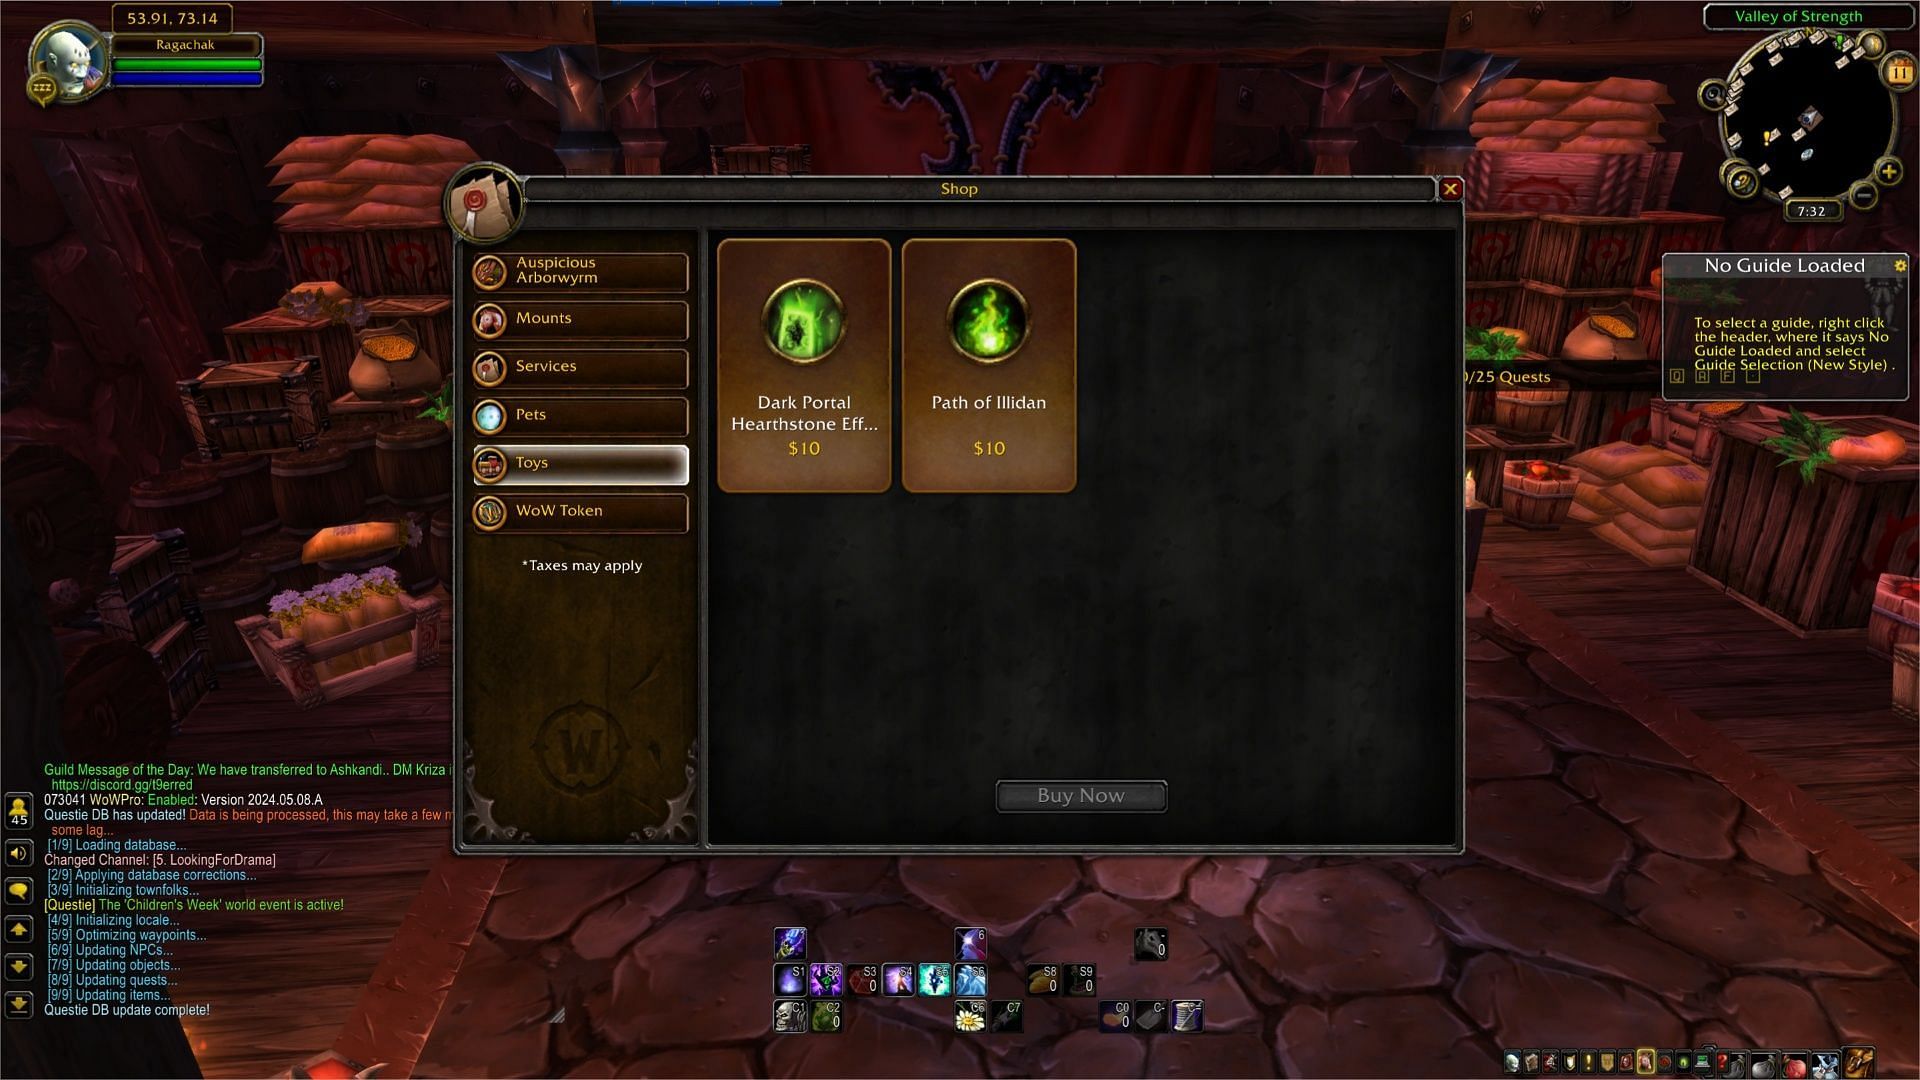 Some of the items you can purchase with real money - please excuse the messy hotbars (Image via Blizzard Entertainment)